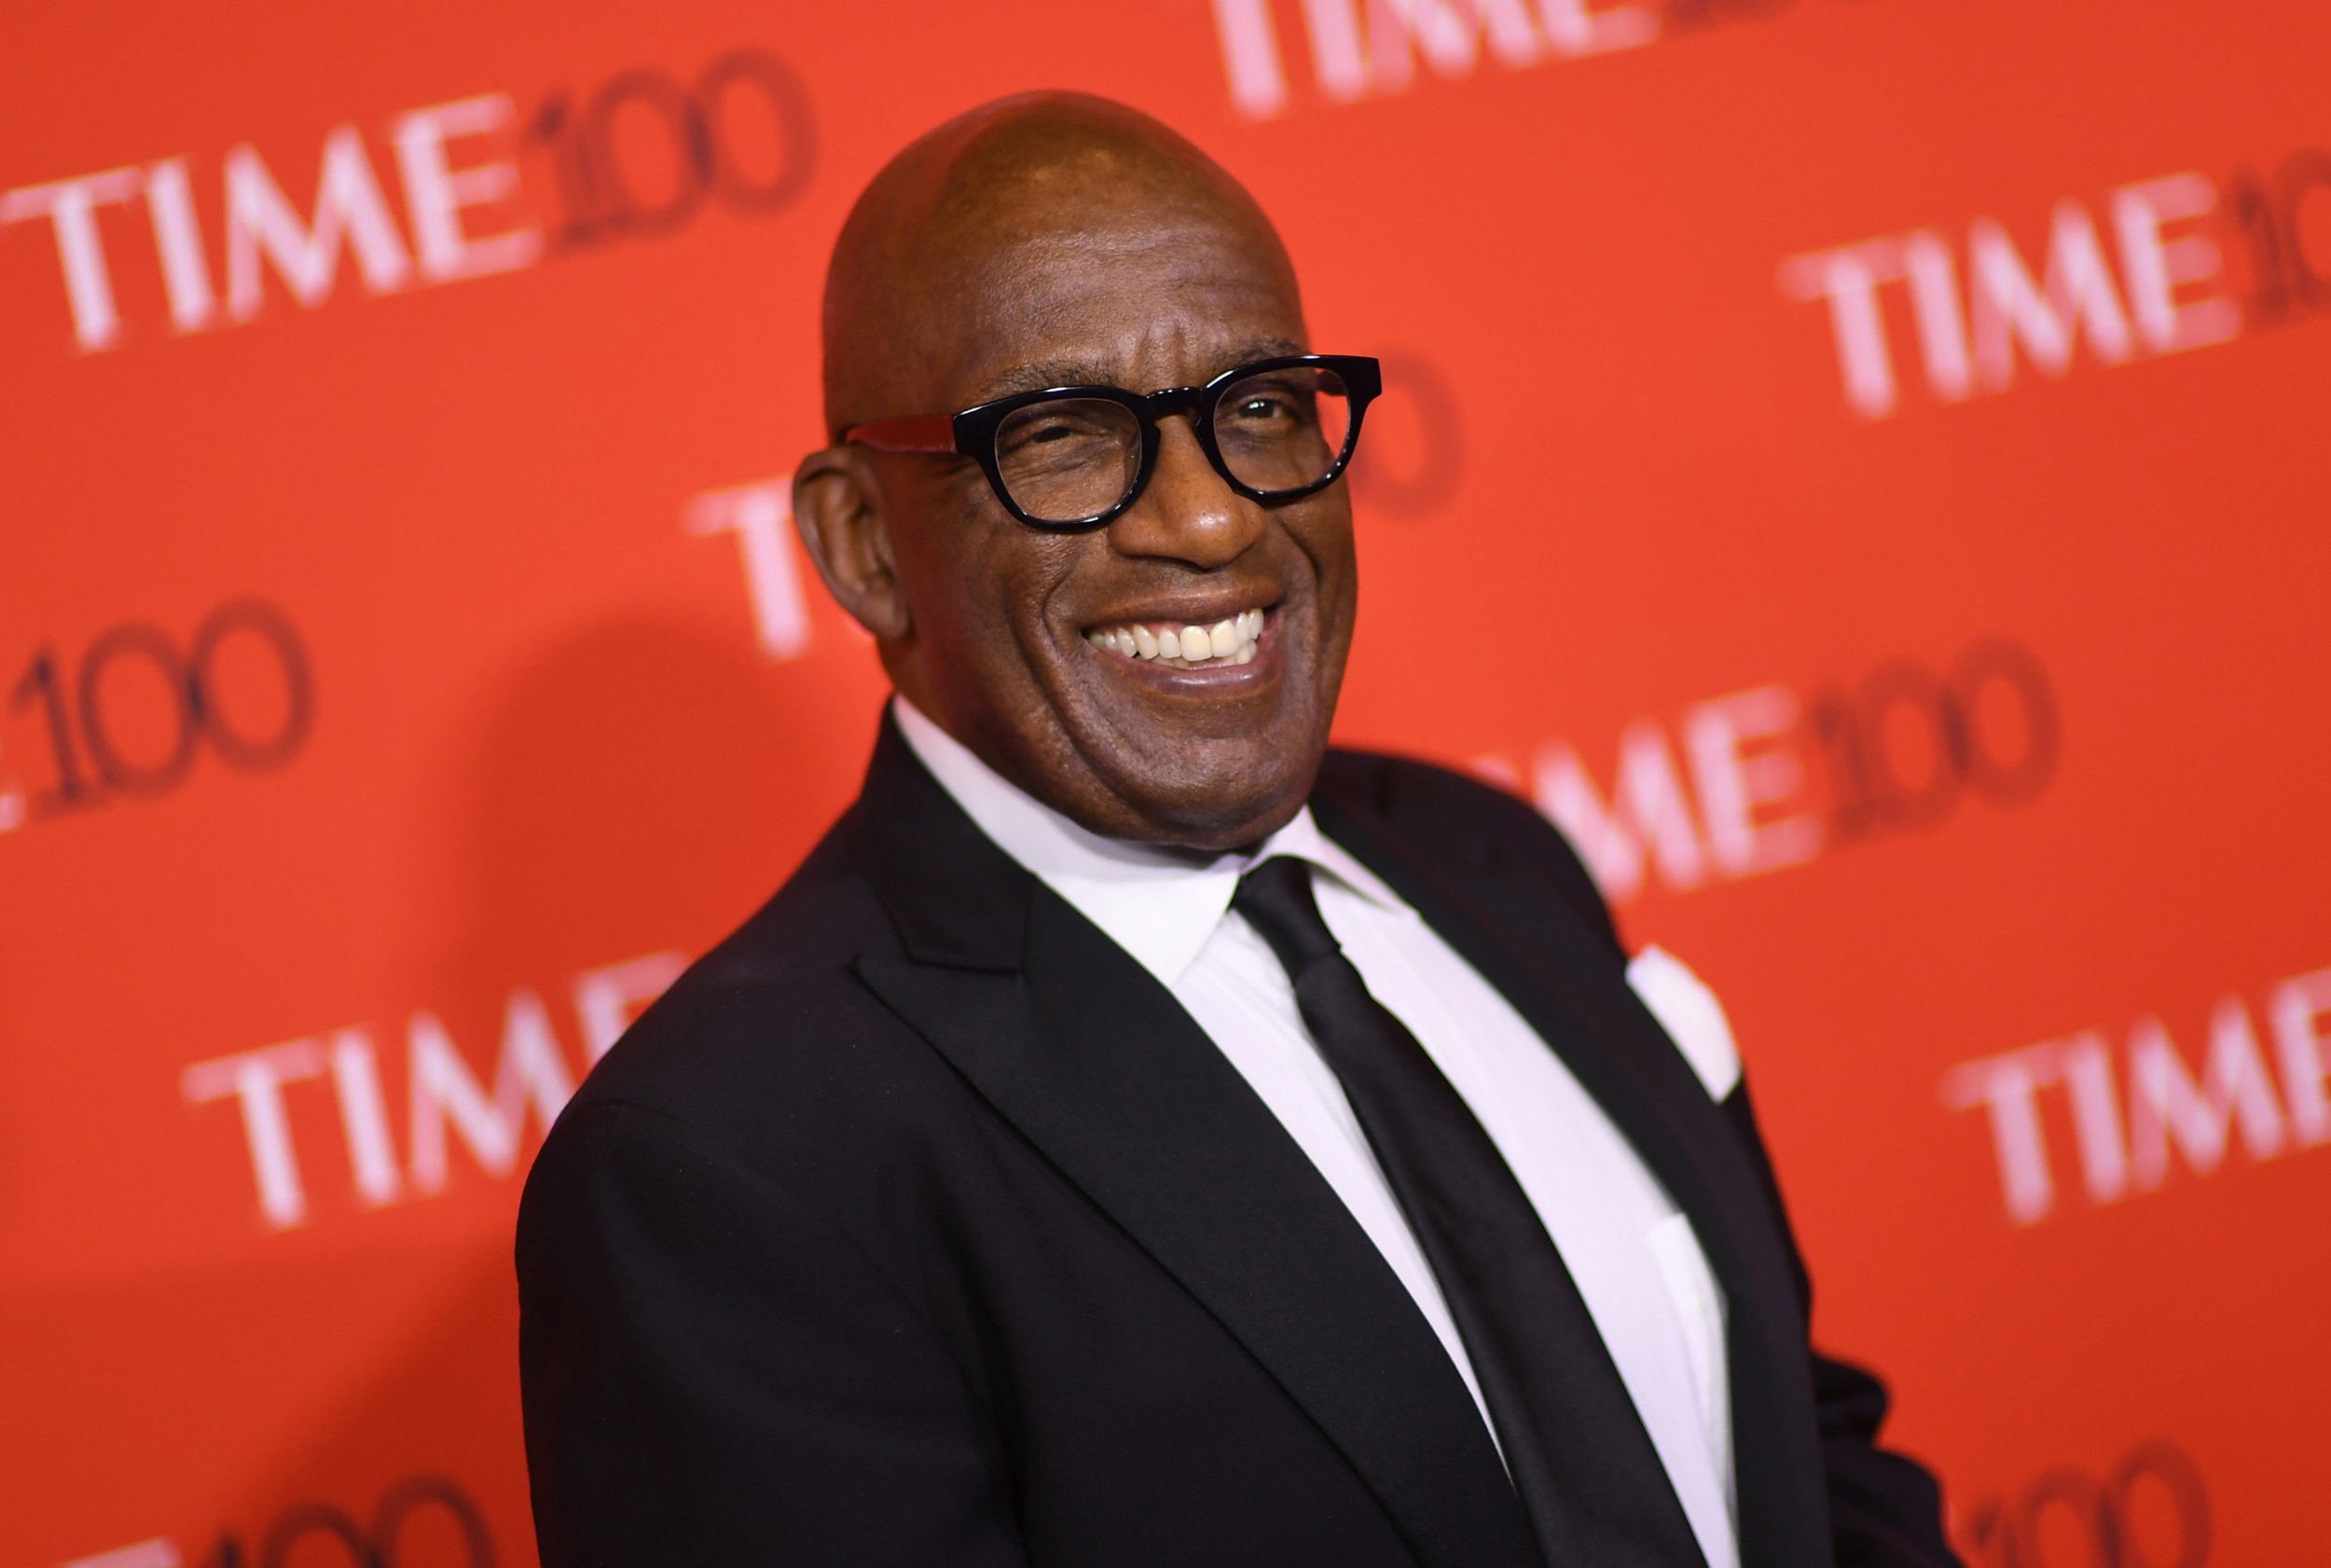 Al Roker Defends Dressing as White Character for Halloween After Taking